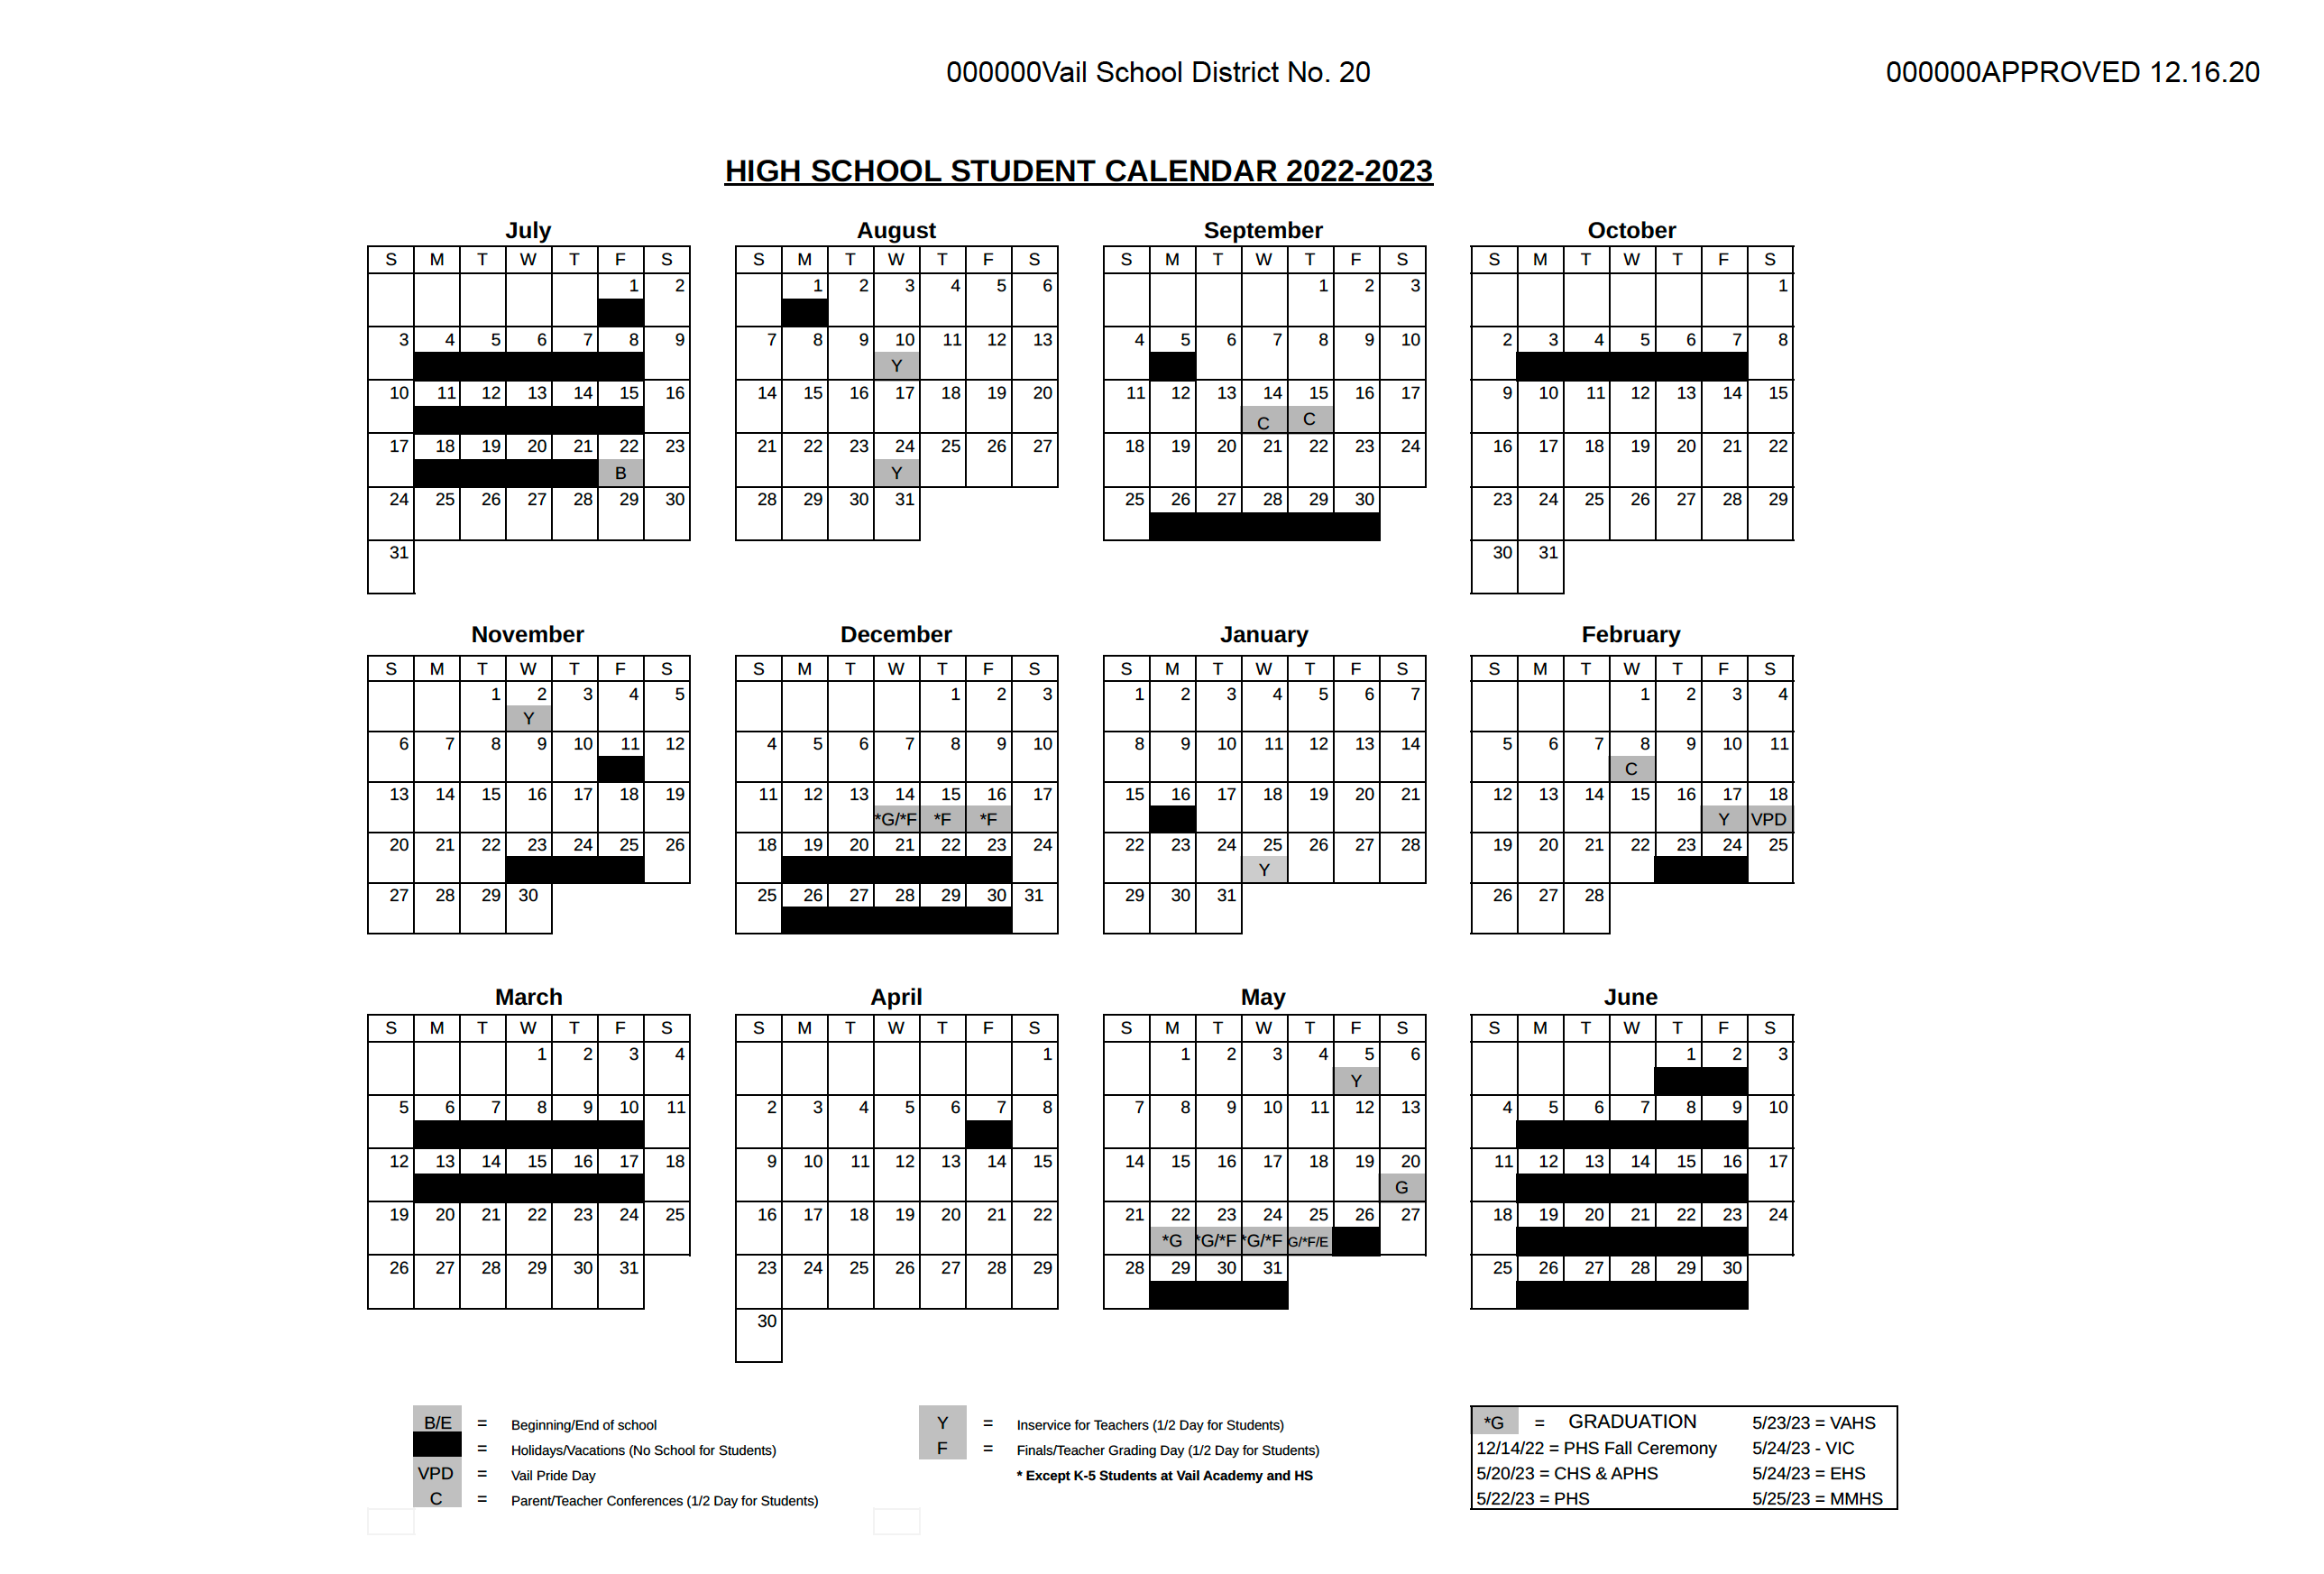 Vail Daily Events Calendar Printable Word Searches